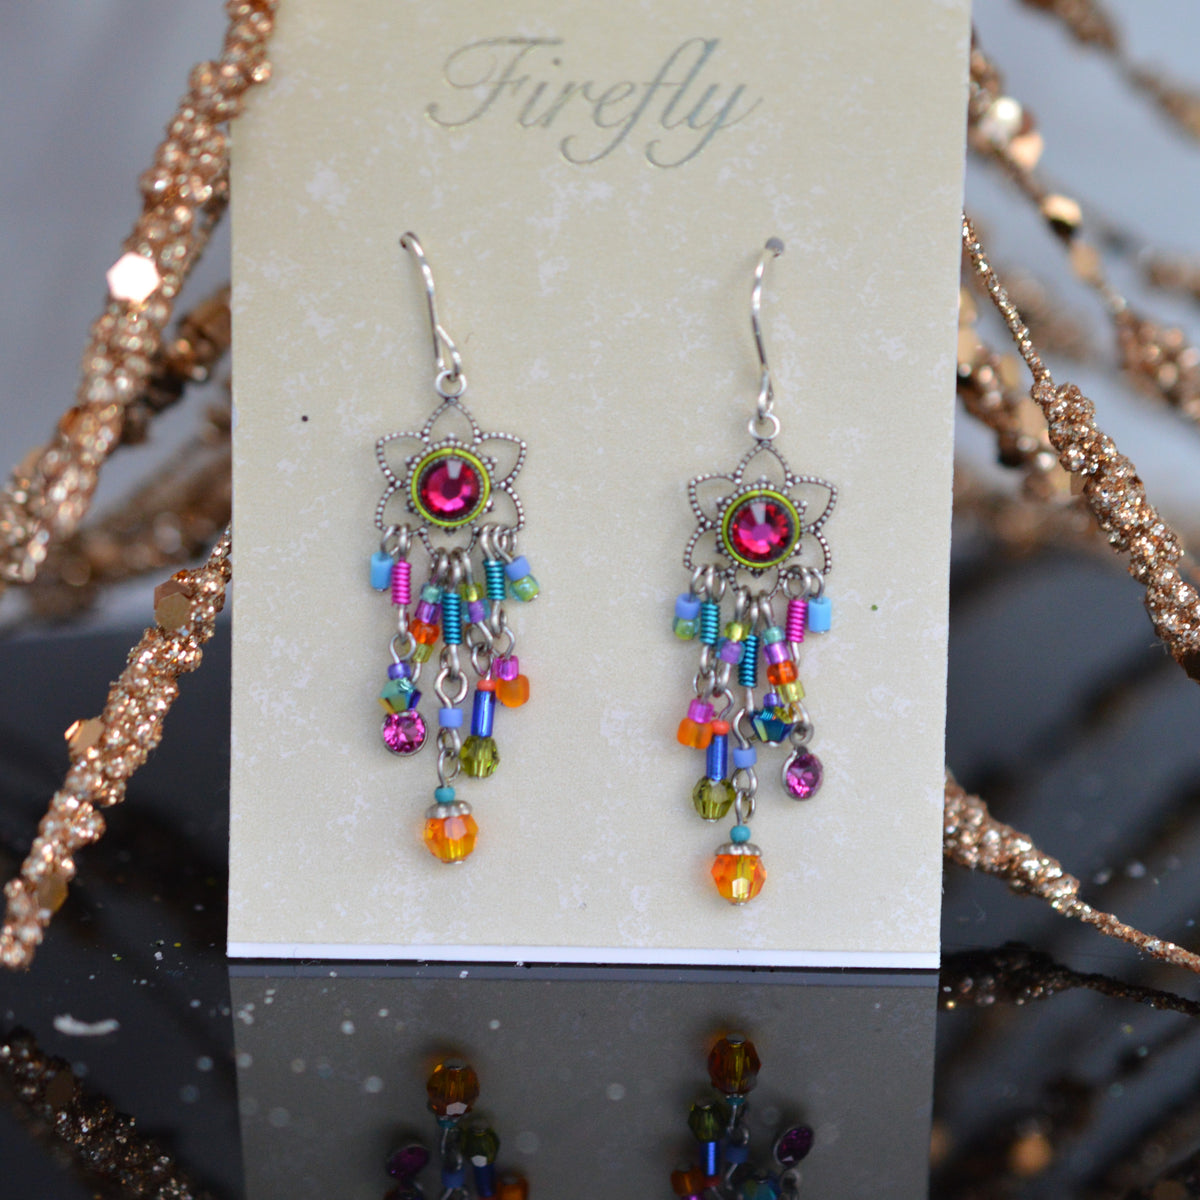 Antique Silver Plated Multi-Color Chandelier Earrings by Firefly